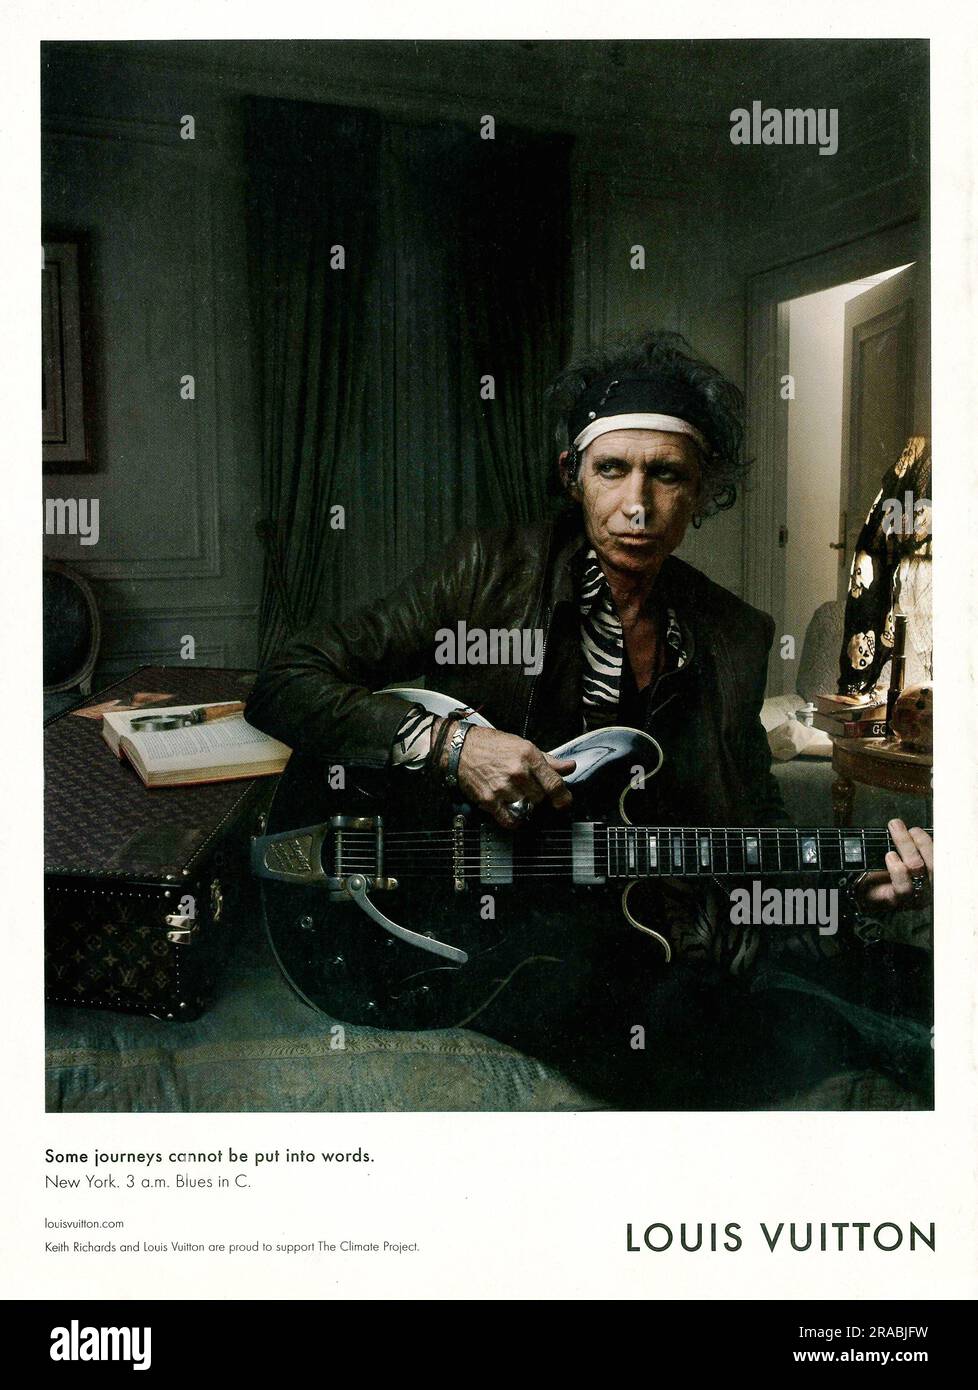 Keith Richards Signs Up For Fashion House Louis Vuitton